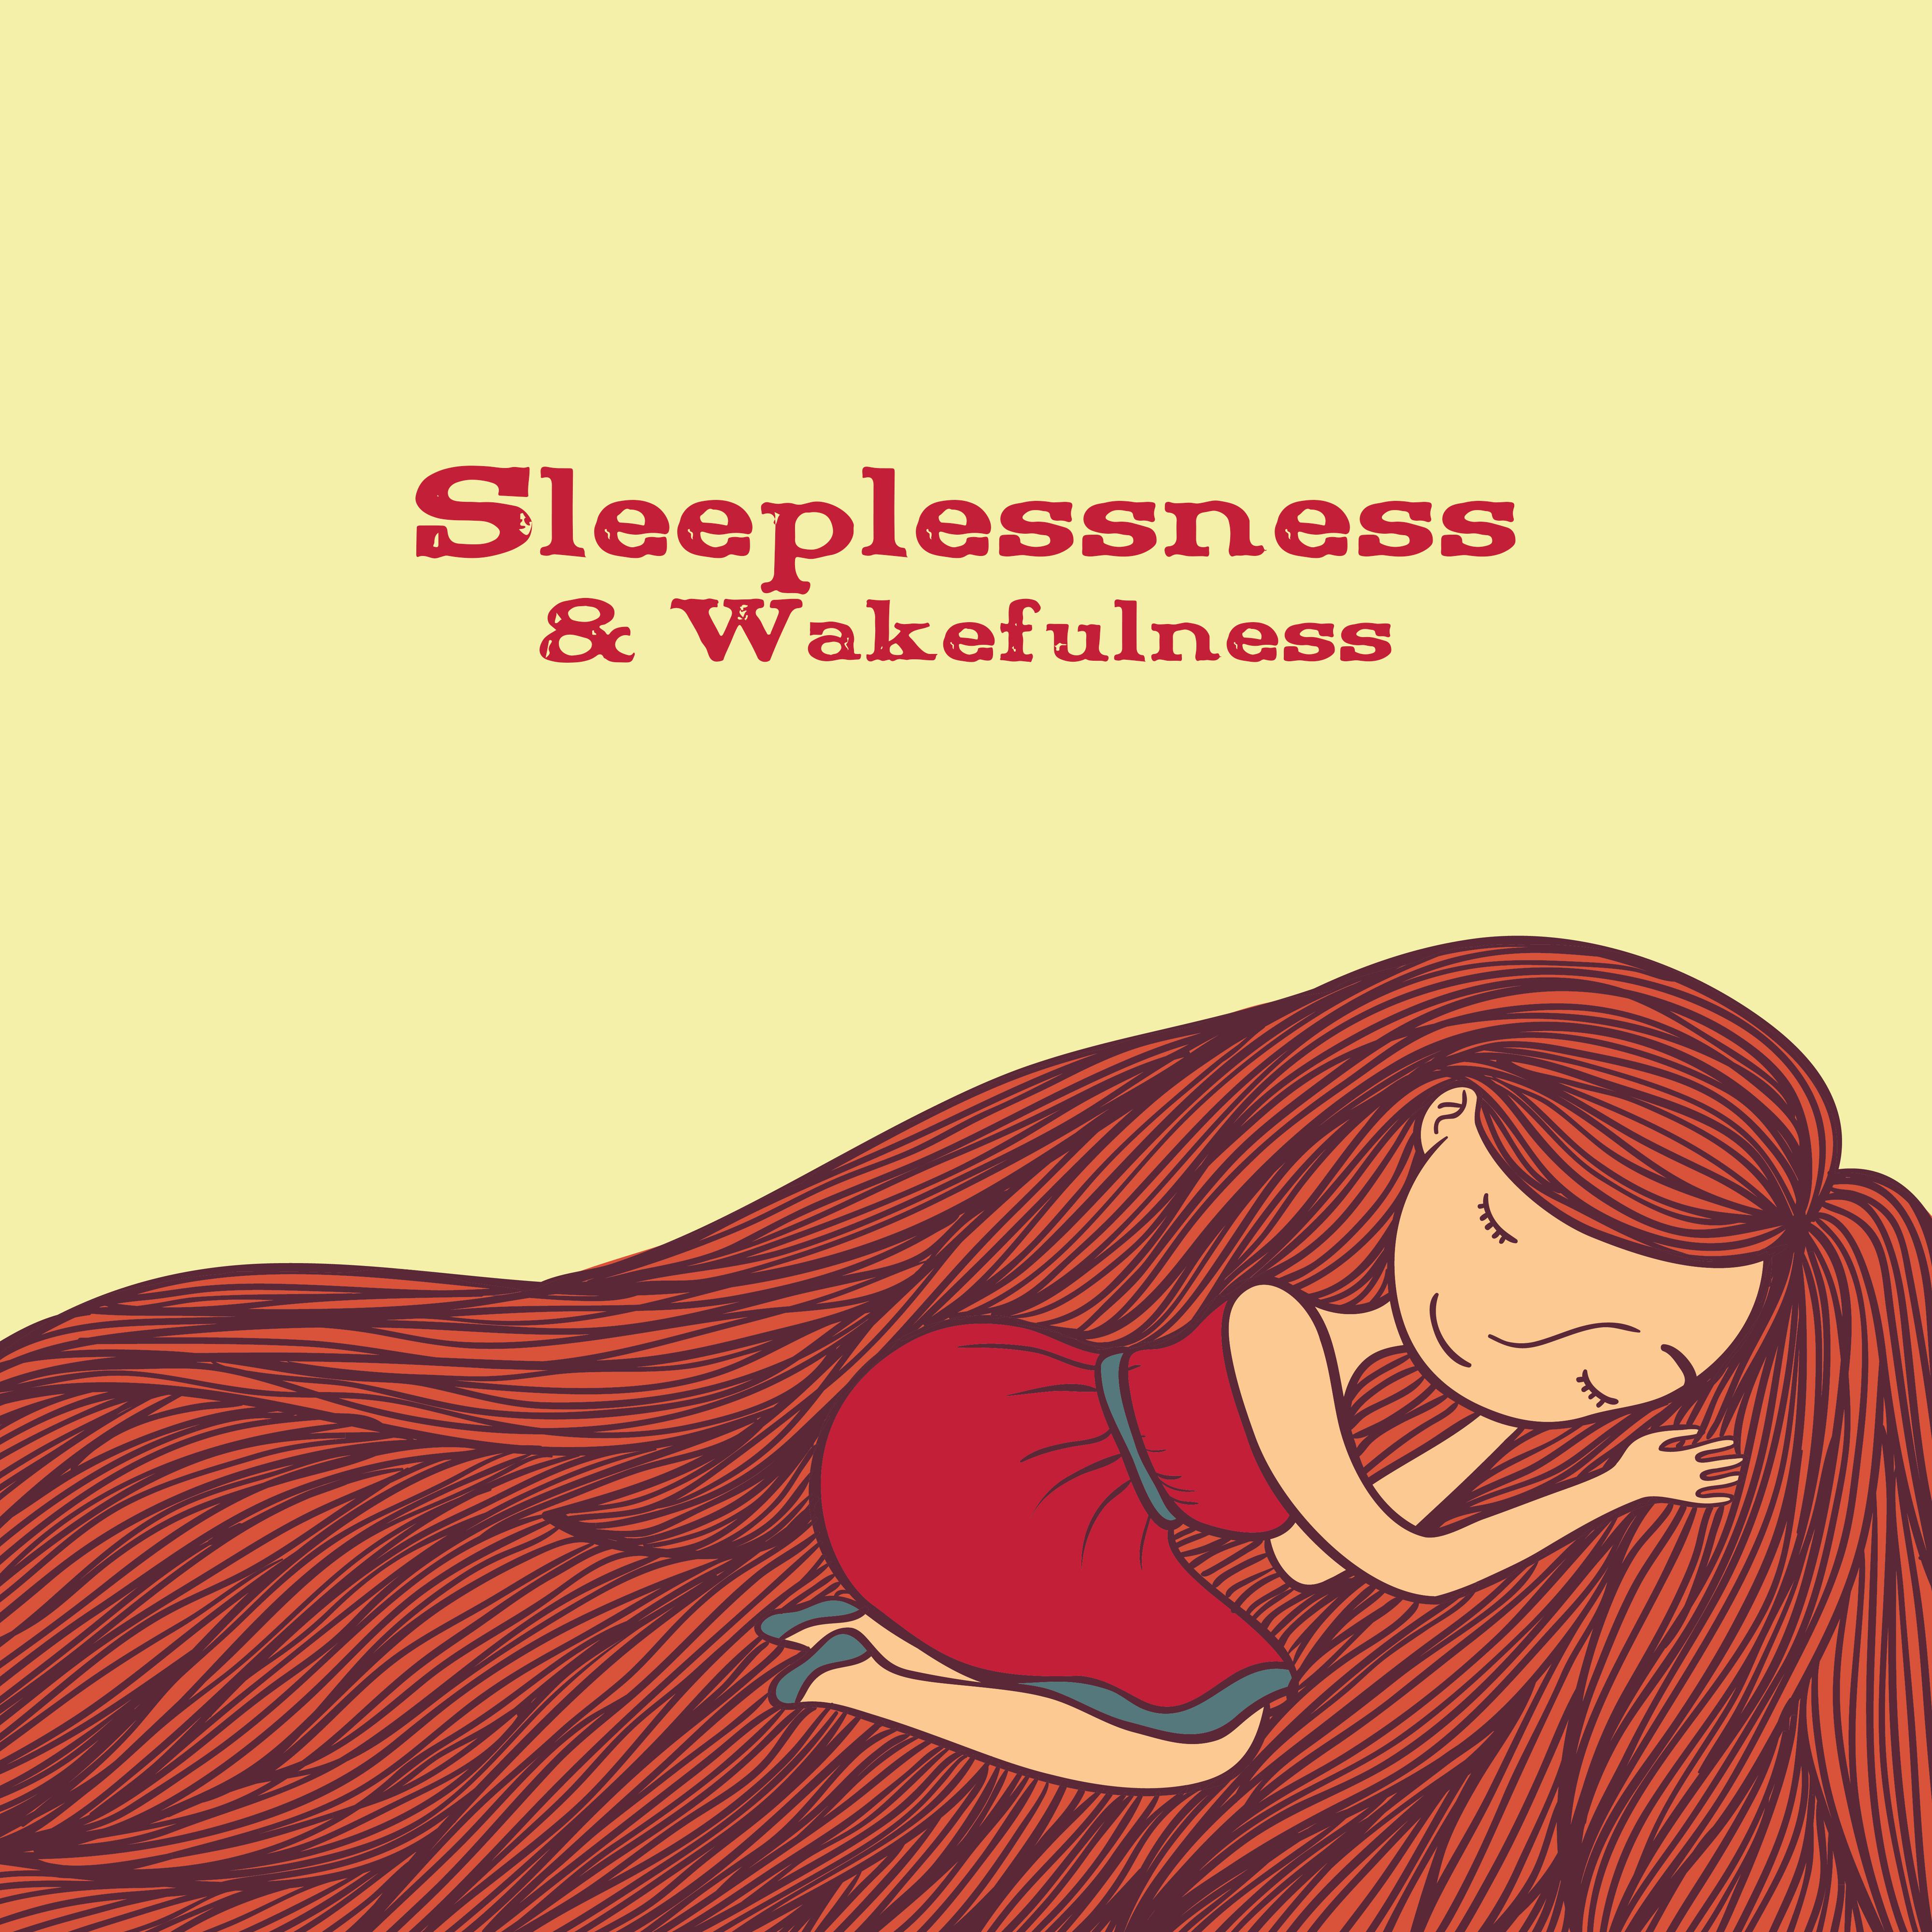 Sleeplessness & Wakefulness - Therapeutic Music in the Fight Against Insomnia and Sleep Problems, Stimulating the Brain and Causing Drowsiness, Helpful in the Process of Falling Asleep